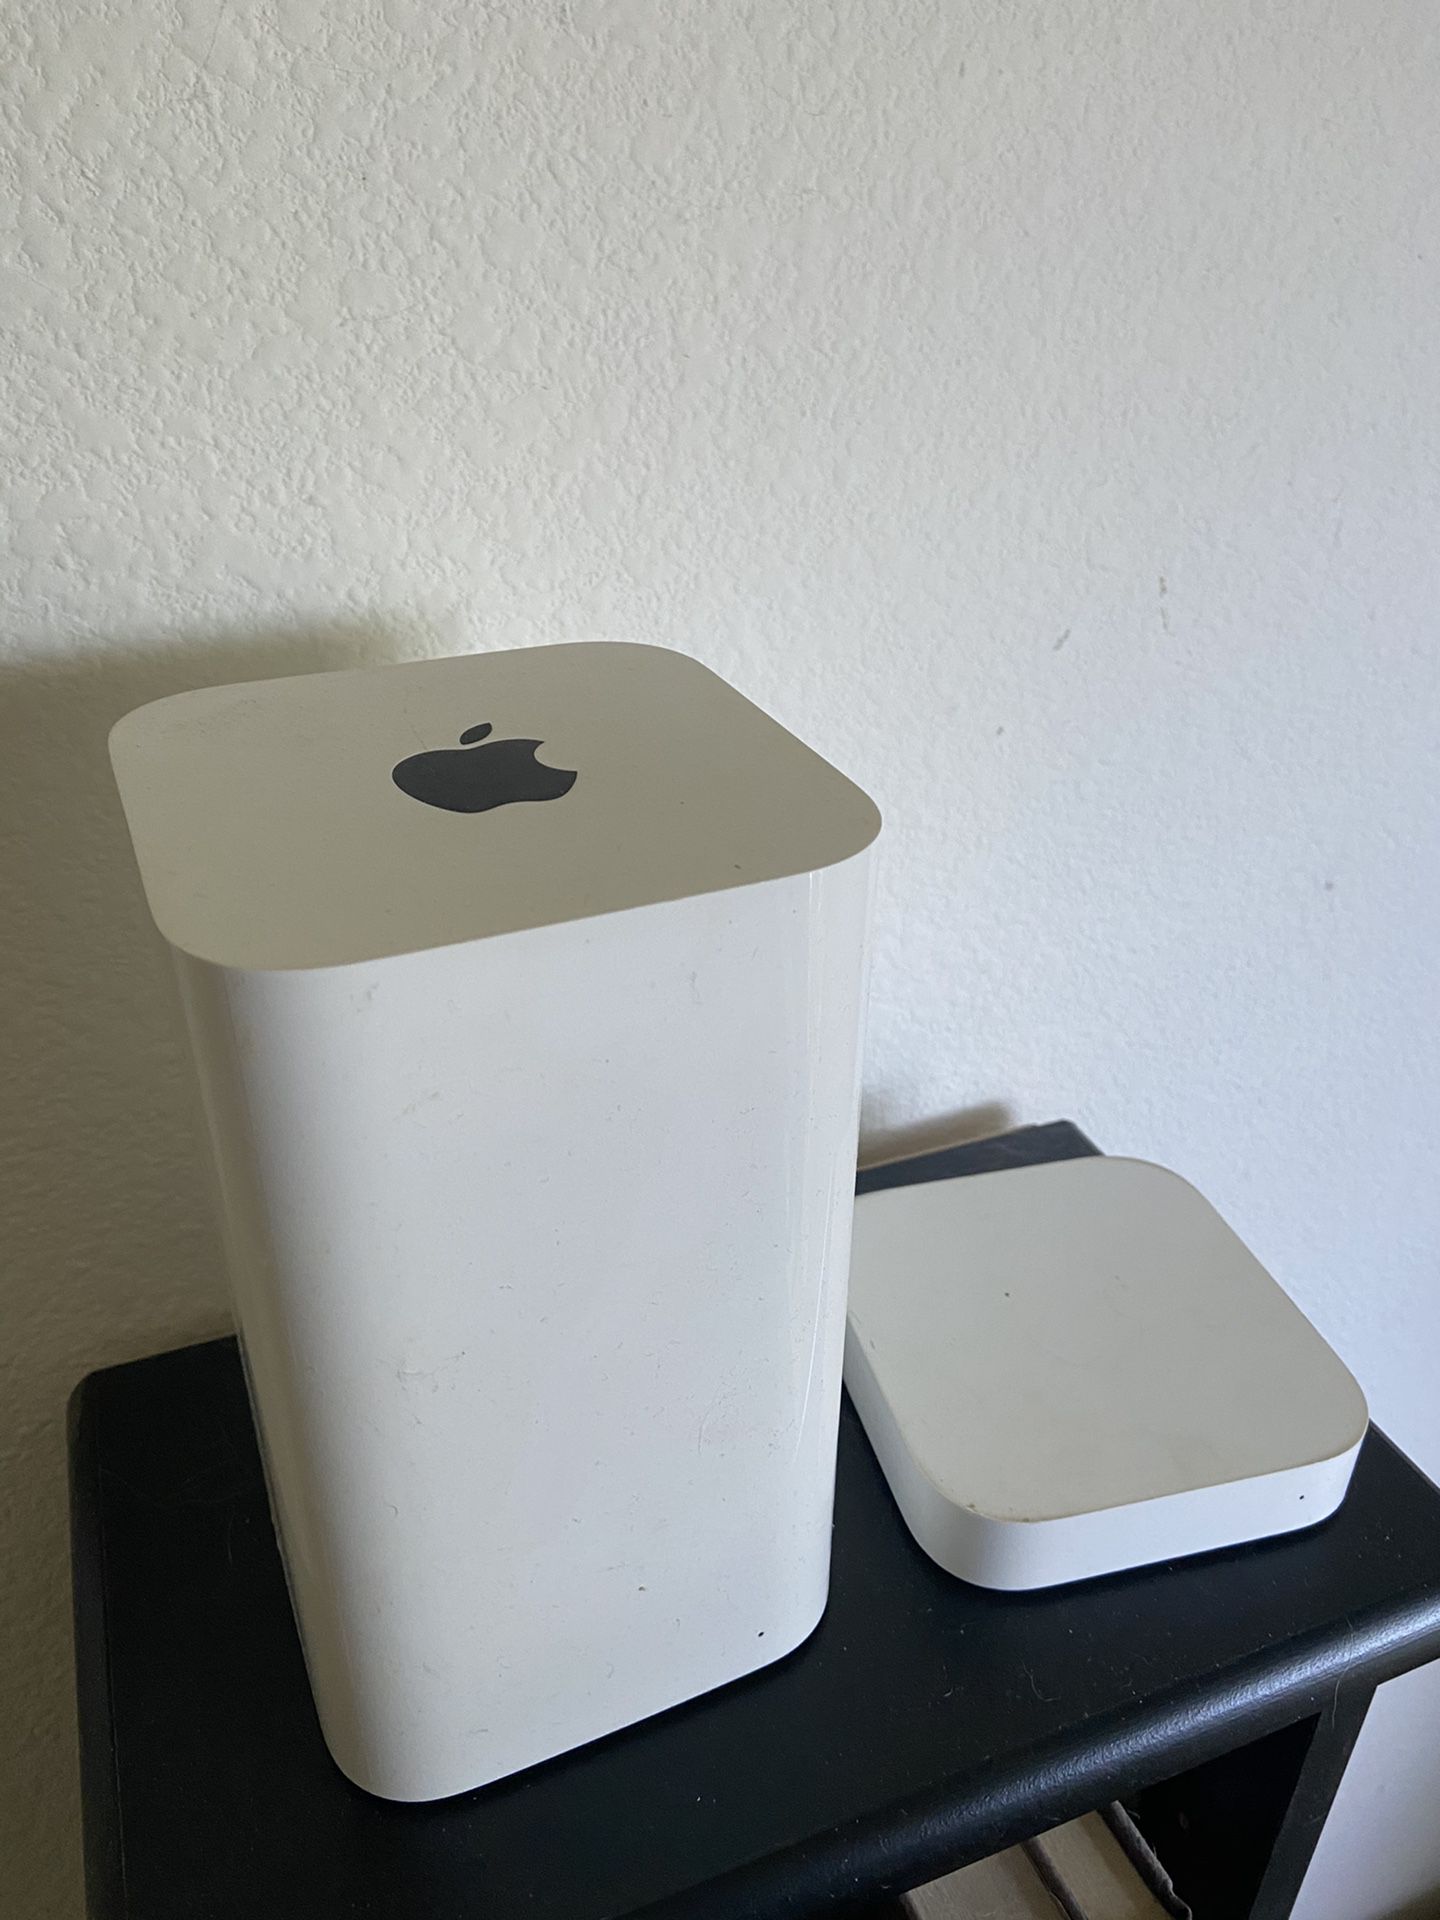 Apple AirPort Extreme & AirPort express